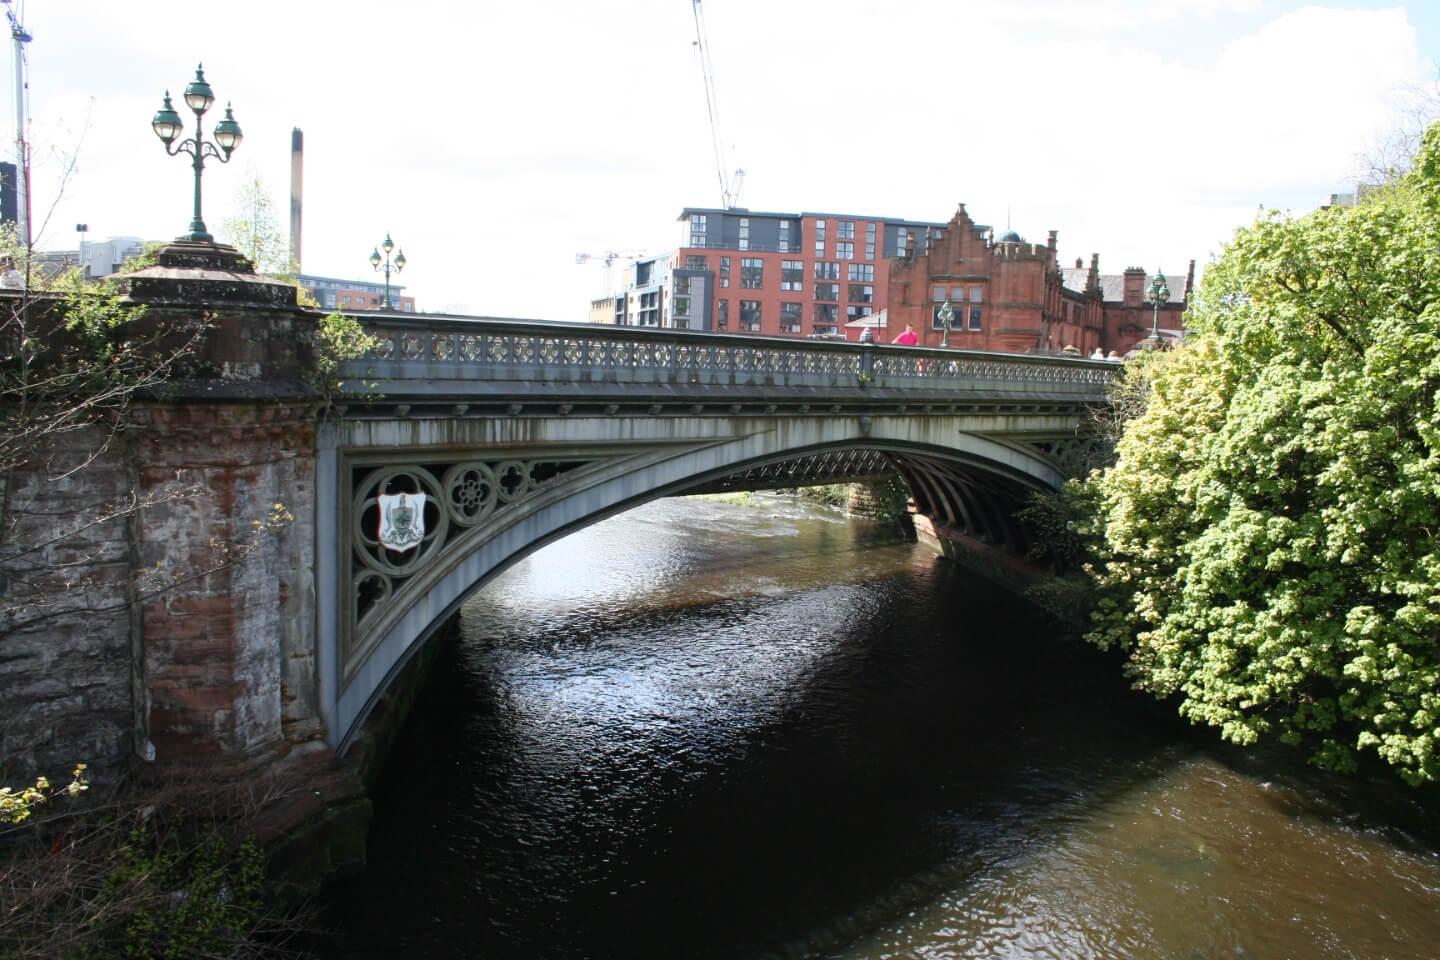 Student Accommodation in Partick, Glasgow - The Partick Bridge